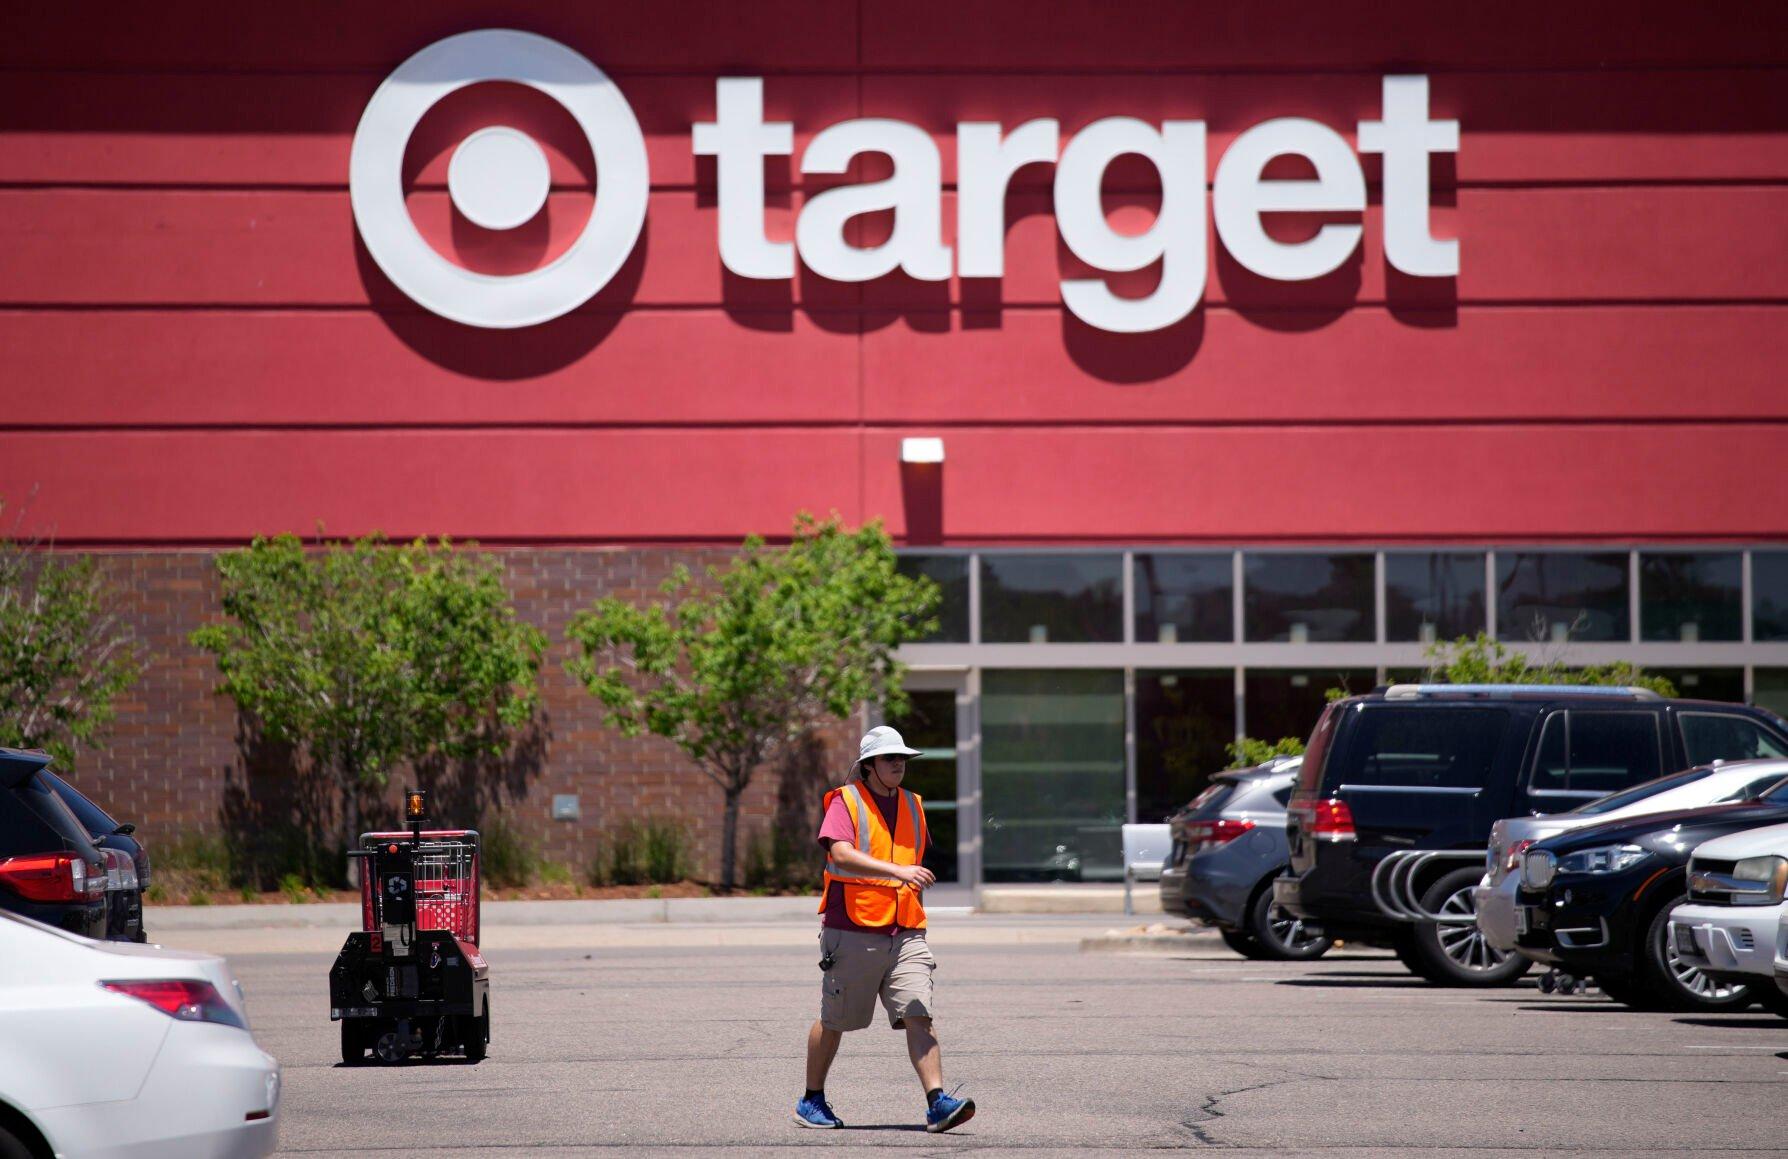 <p>FILE - A worker collects shopping carts in the parking lot of a Target store on June 9, 2021, in Highlands Ranch, Colo. Target is removing certain items from its stores and making other changes to its LGBTQ merchandise nationwide ahead of Pride month, after an intense backlash from some customers including violent confrontations with its workers. (AP Photo/David Zalubowski, File)</p>   PHOTO CREDIT: David Zalubowski 